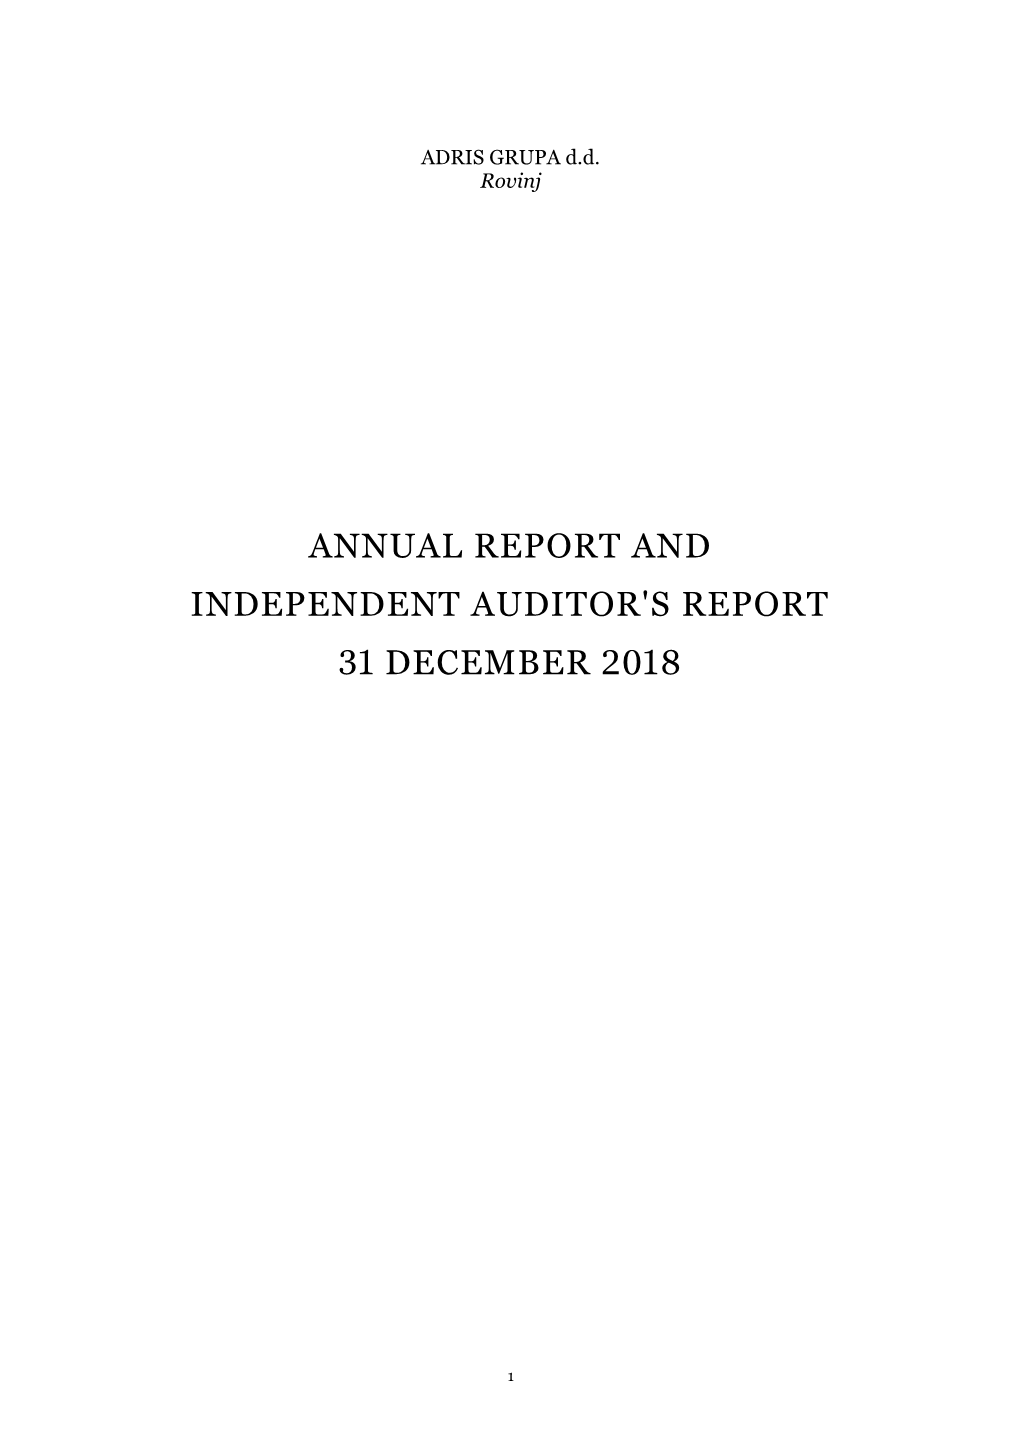 Annual Report and Independent Auditor's Report 31 December 2018